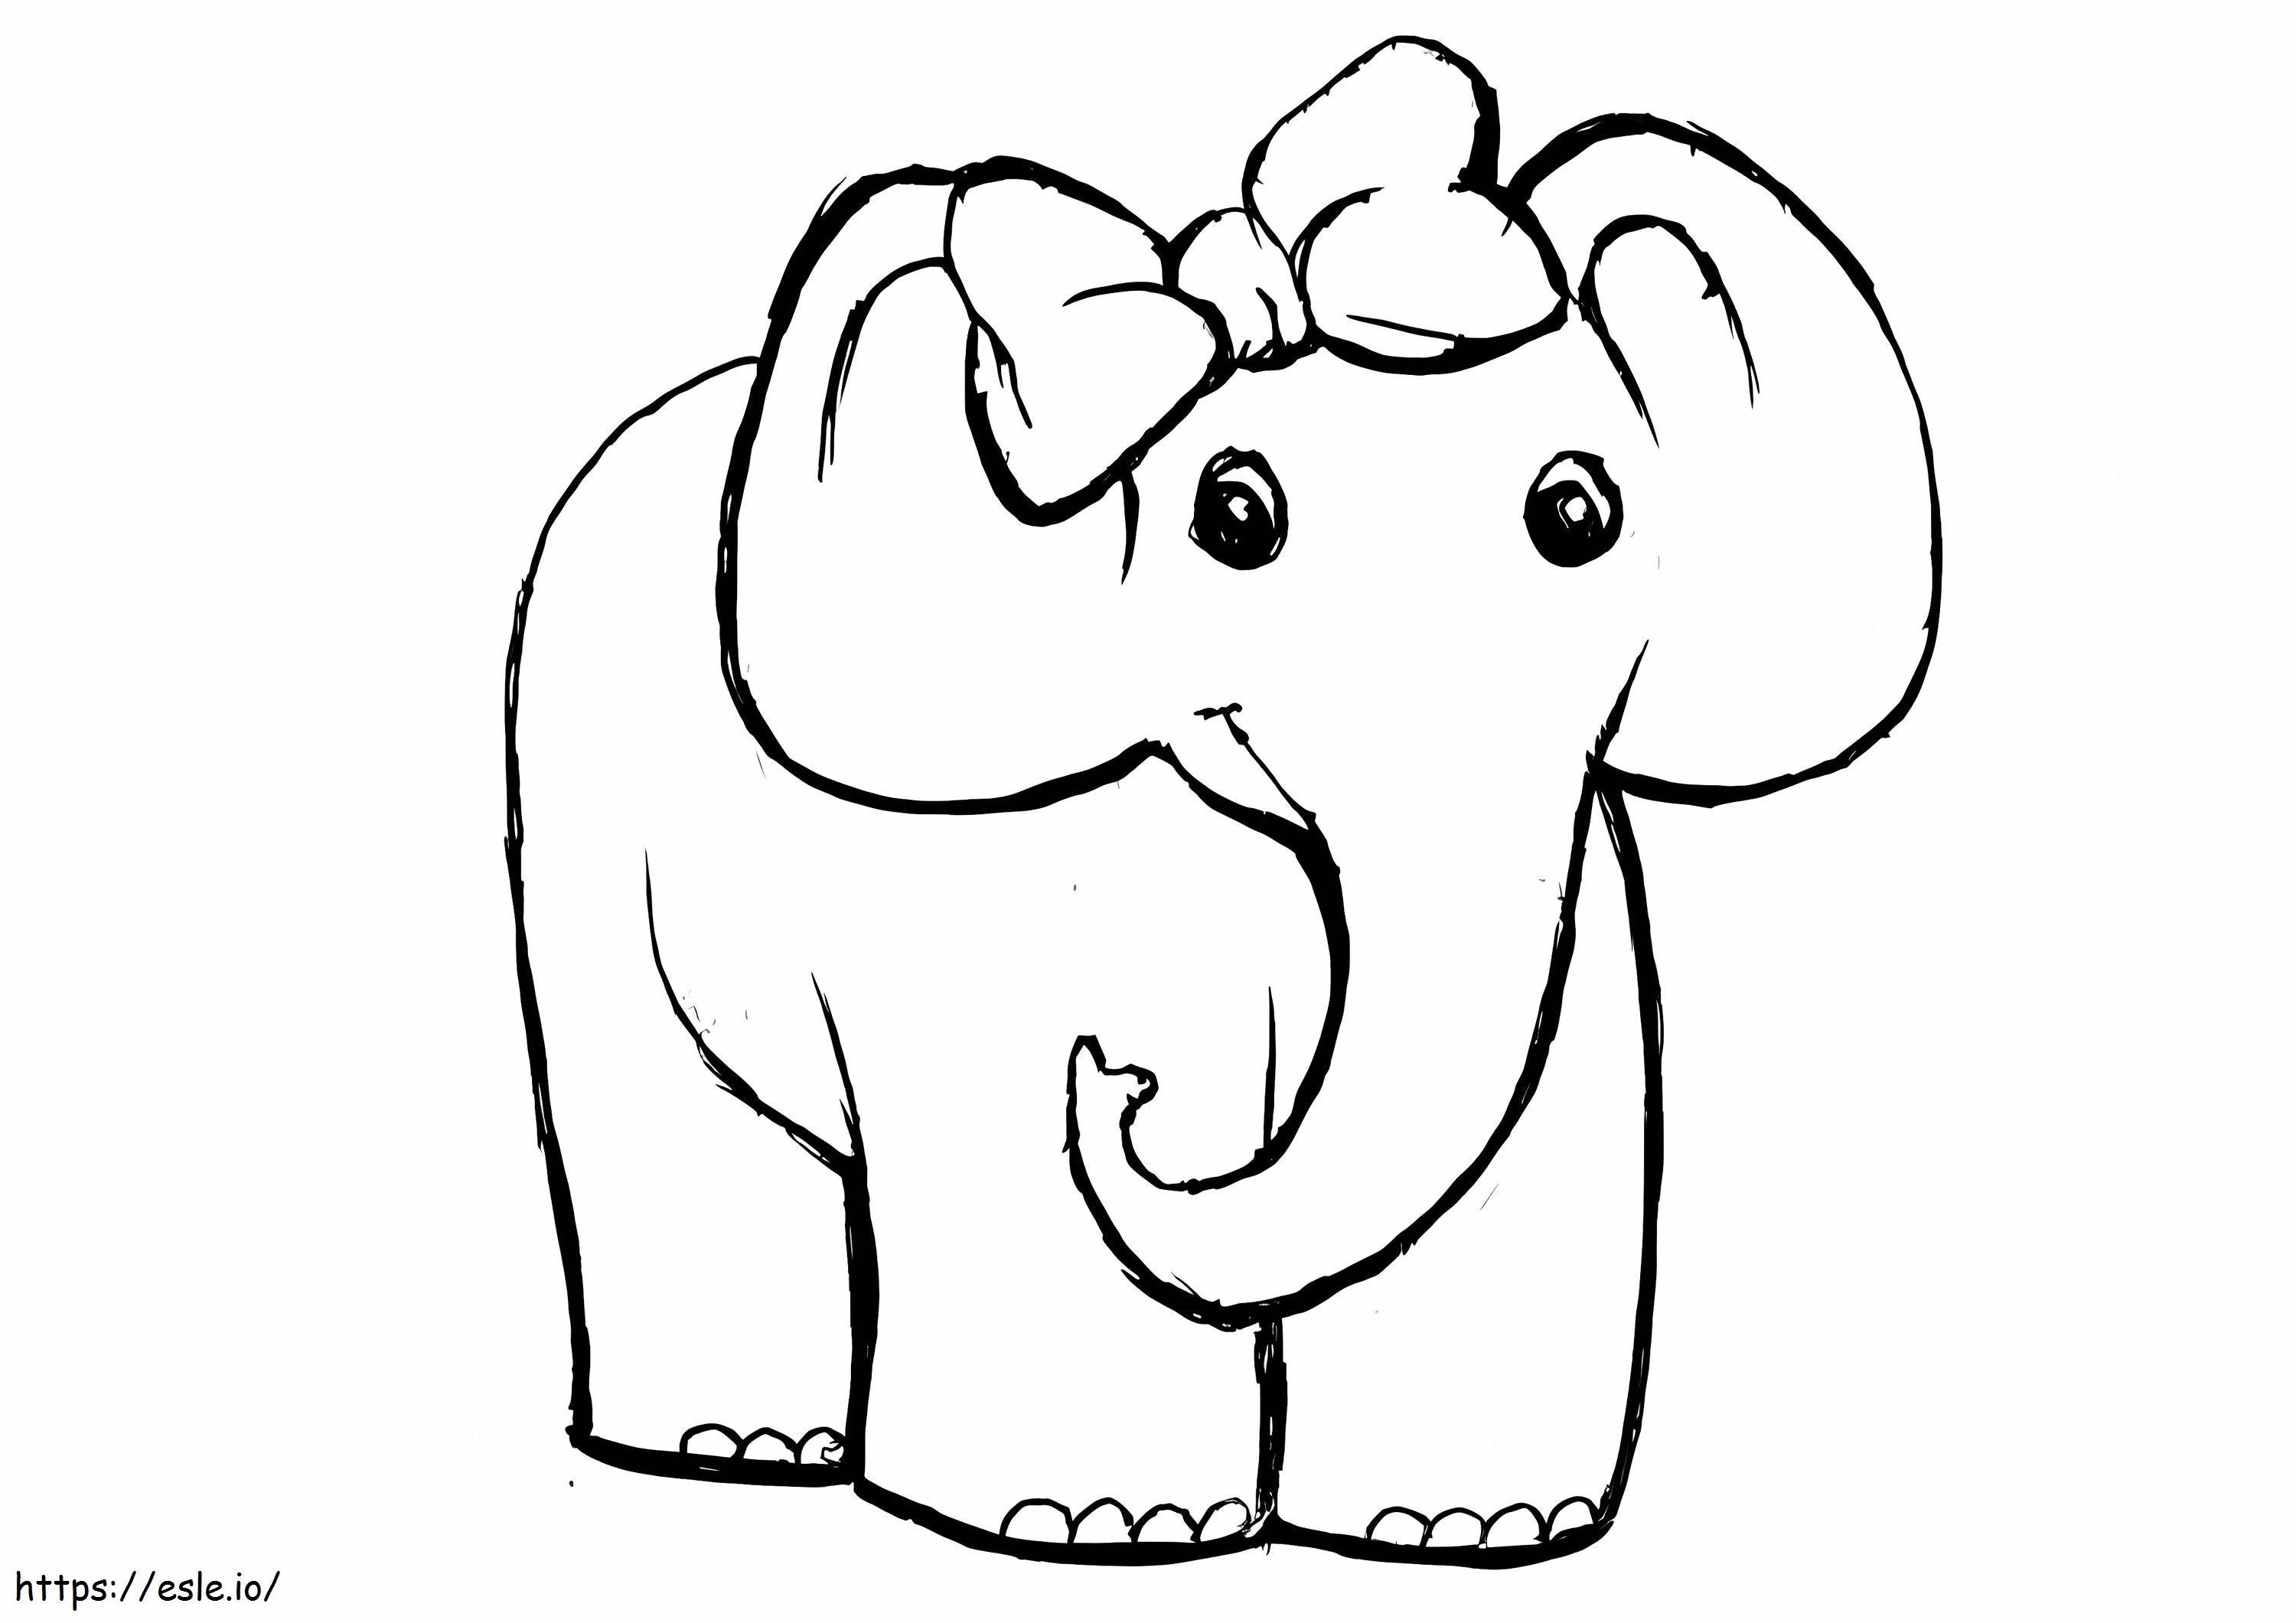 Female Elephant coloring page